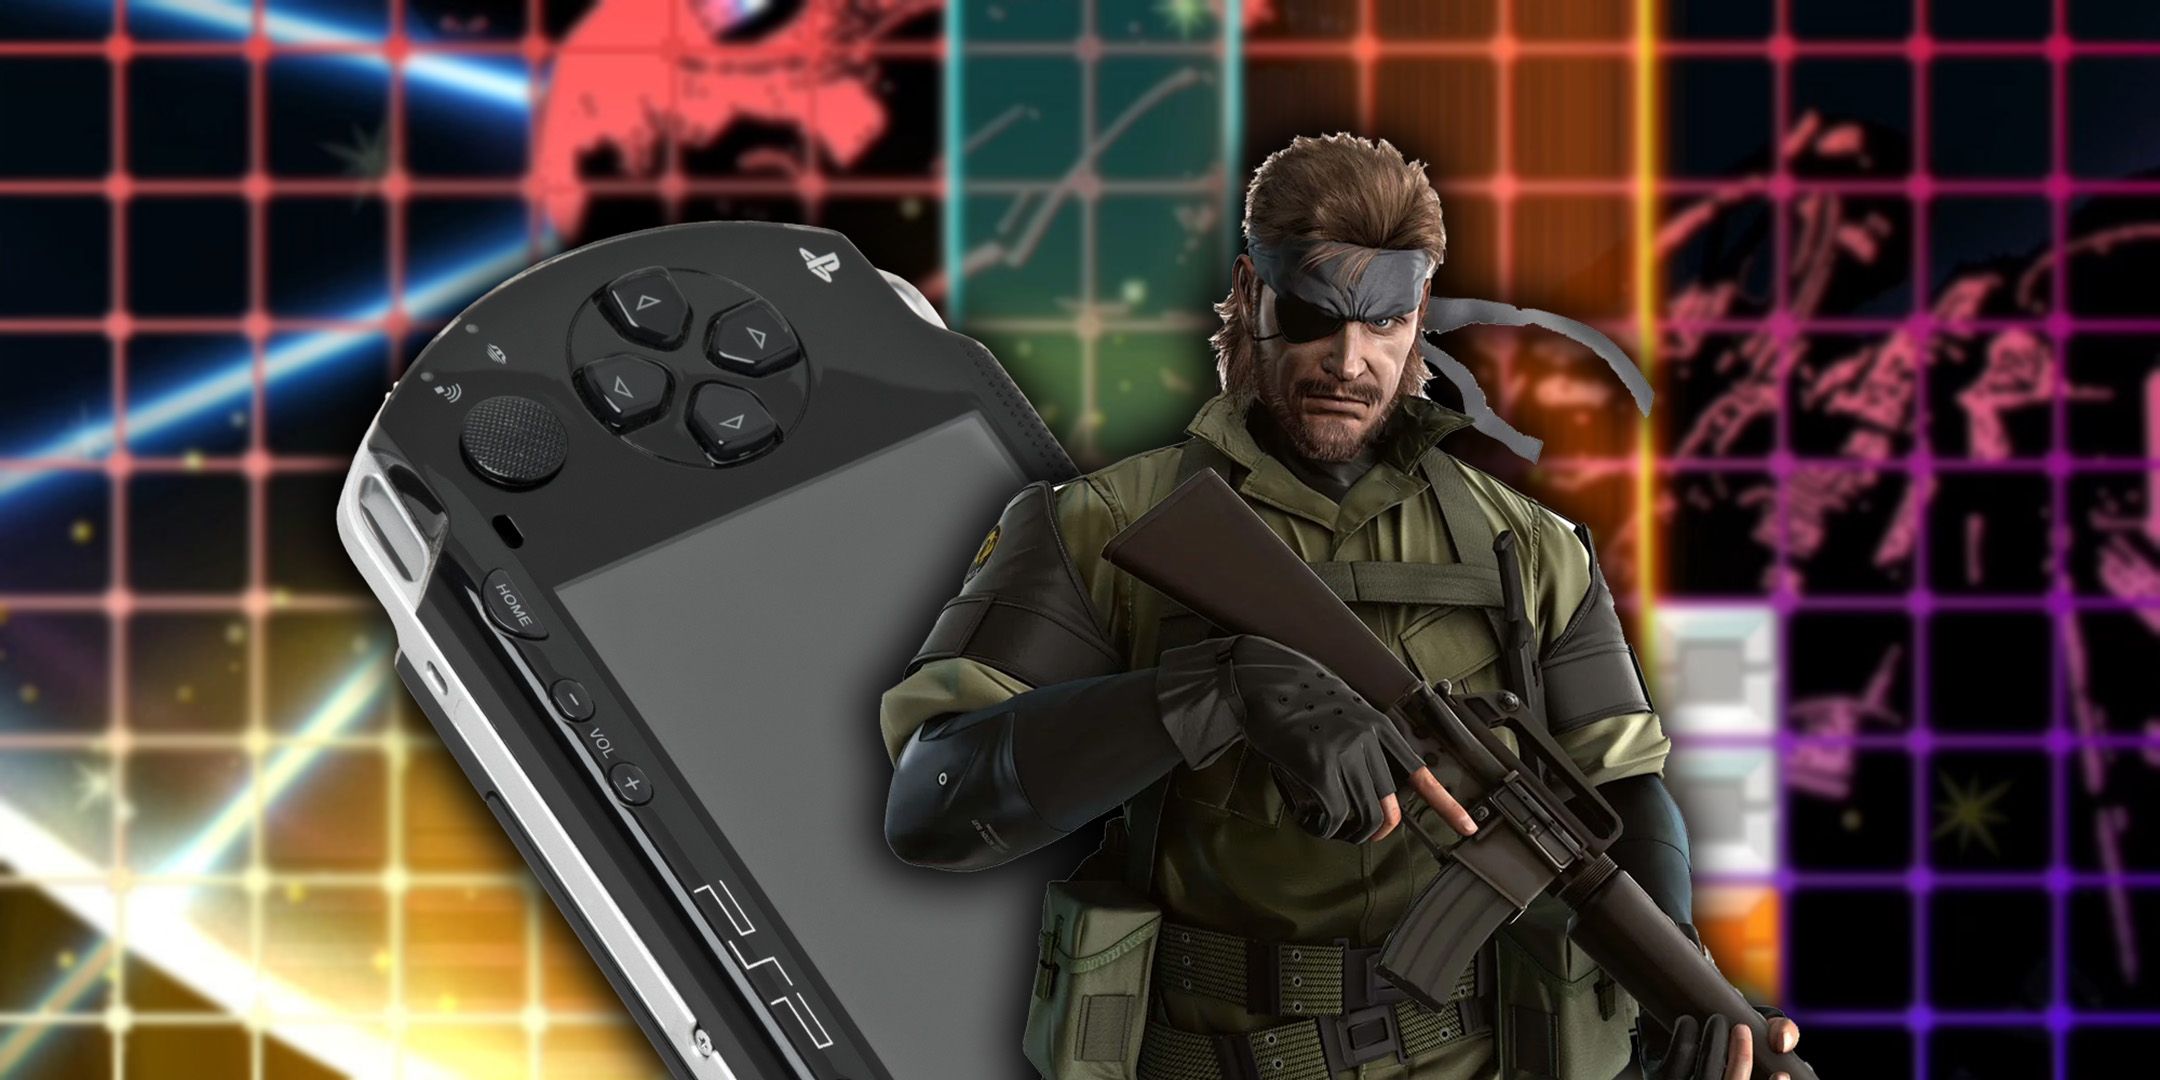 Big Boss Snake and PSP in front of Lumines Neon background